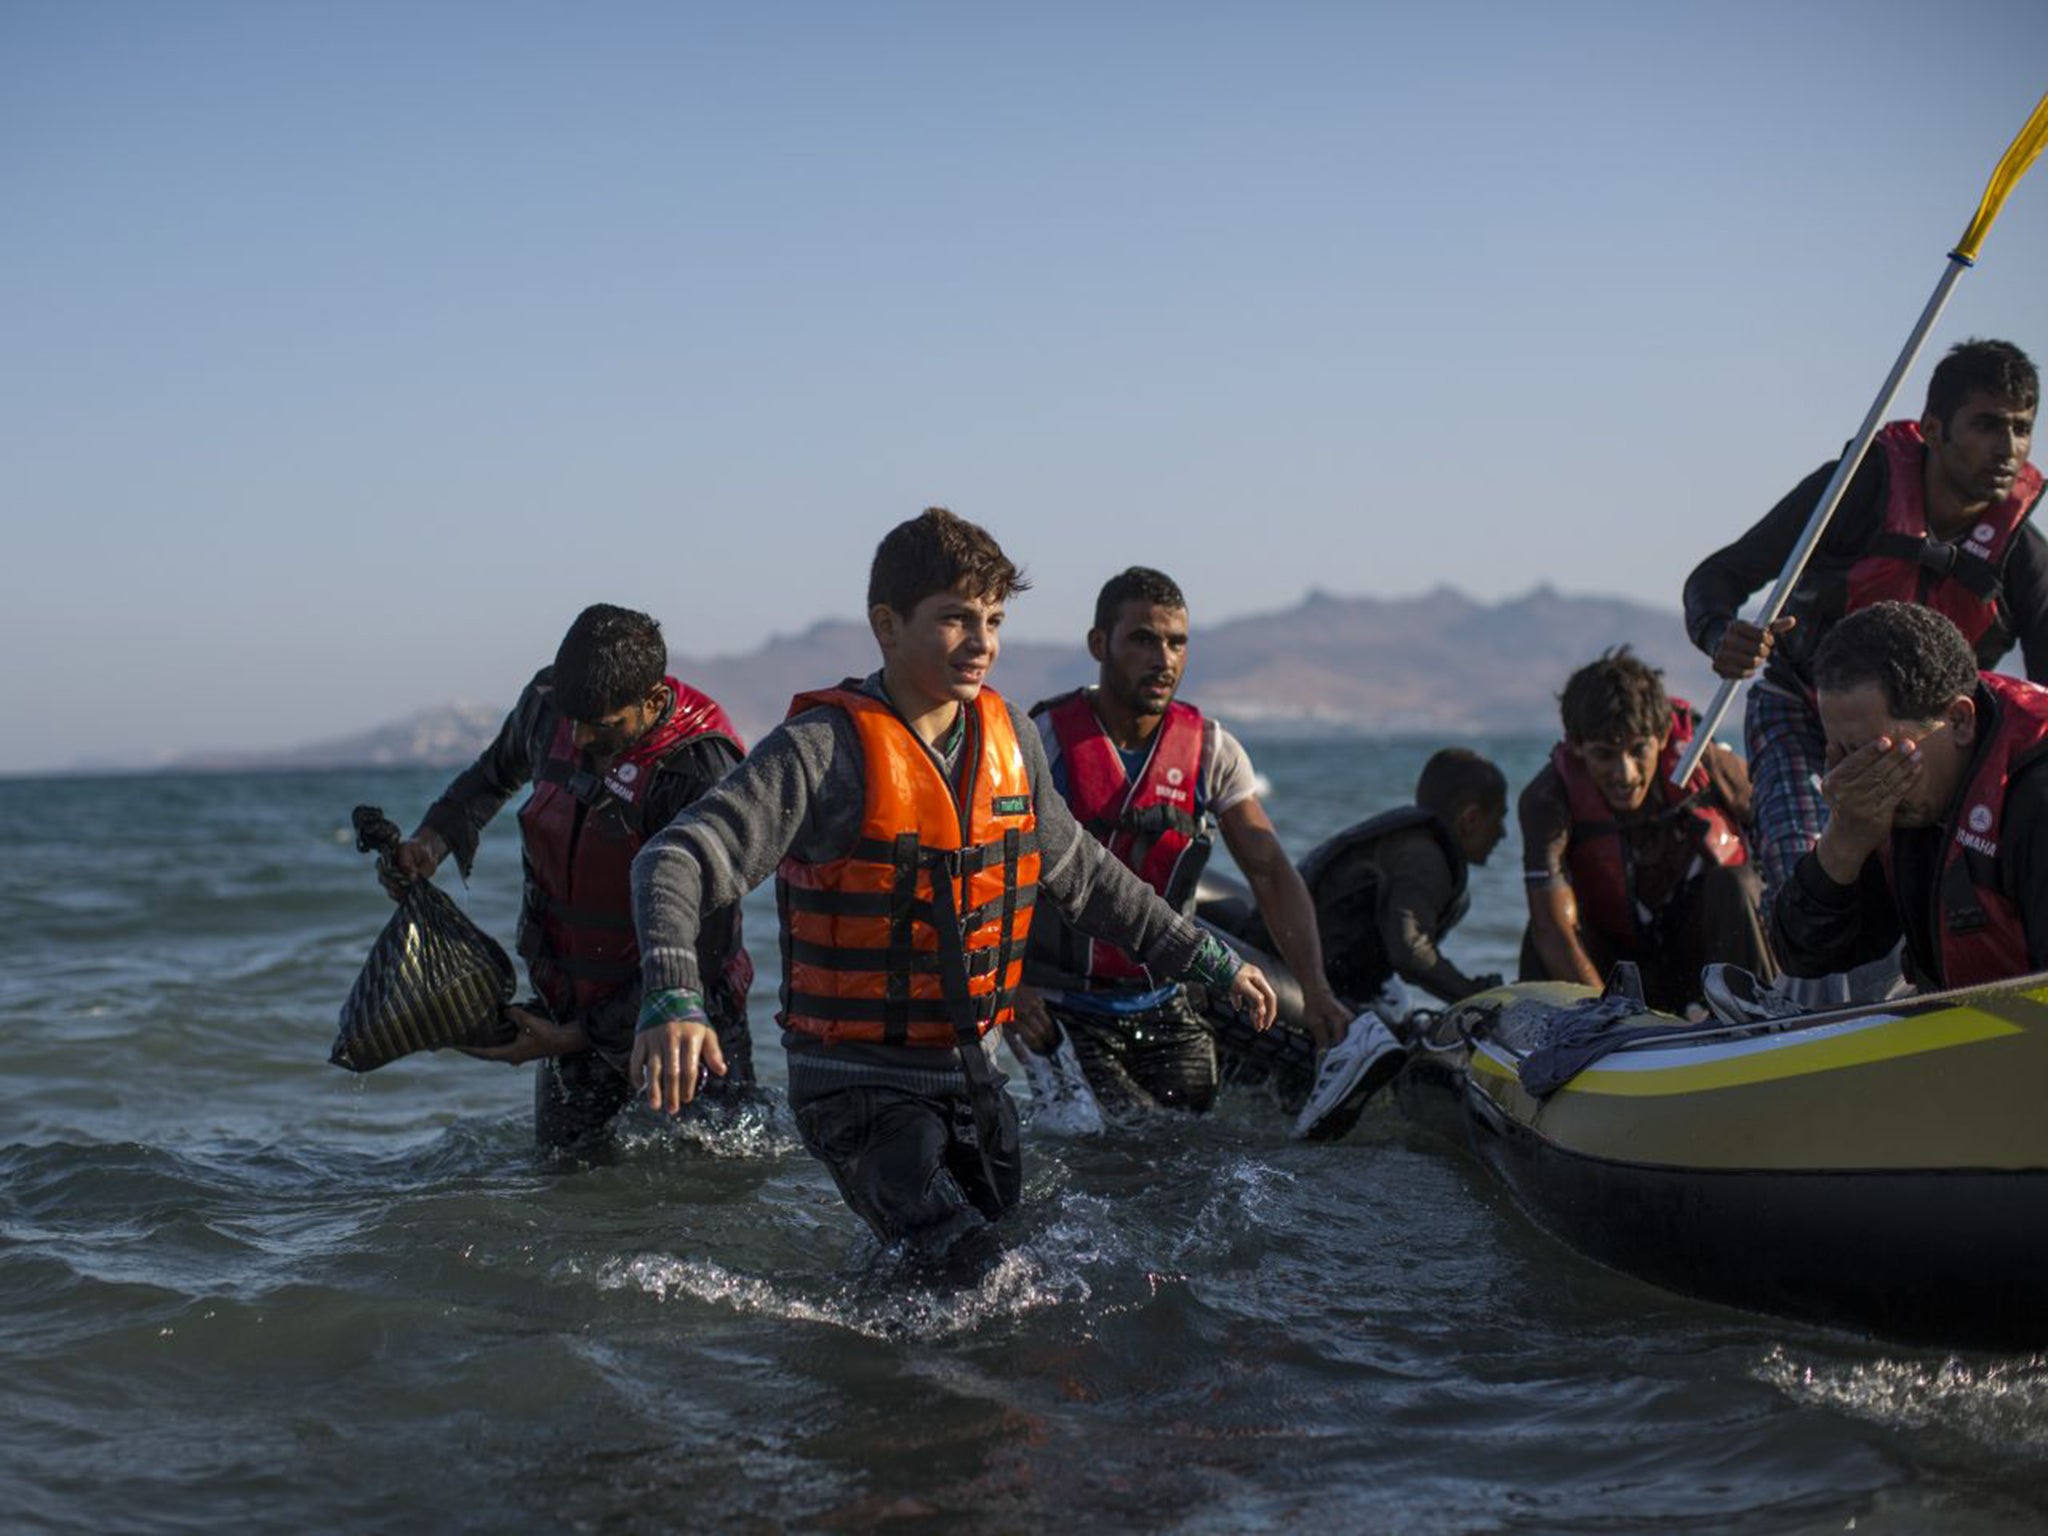 A group of refugees on an inflatable dinghy reach the beach at Kos